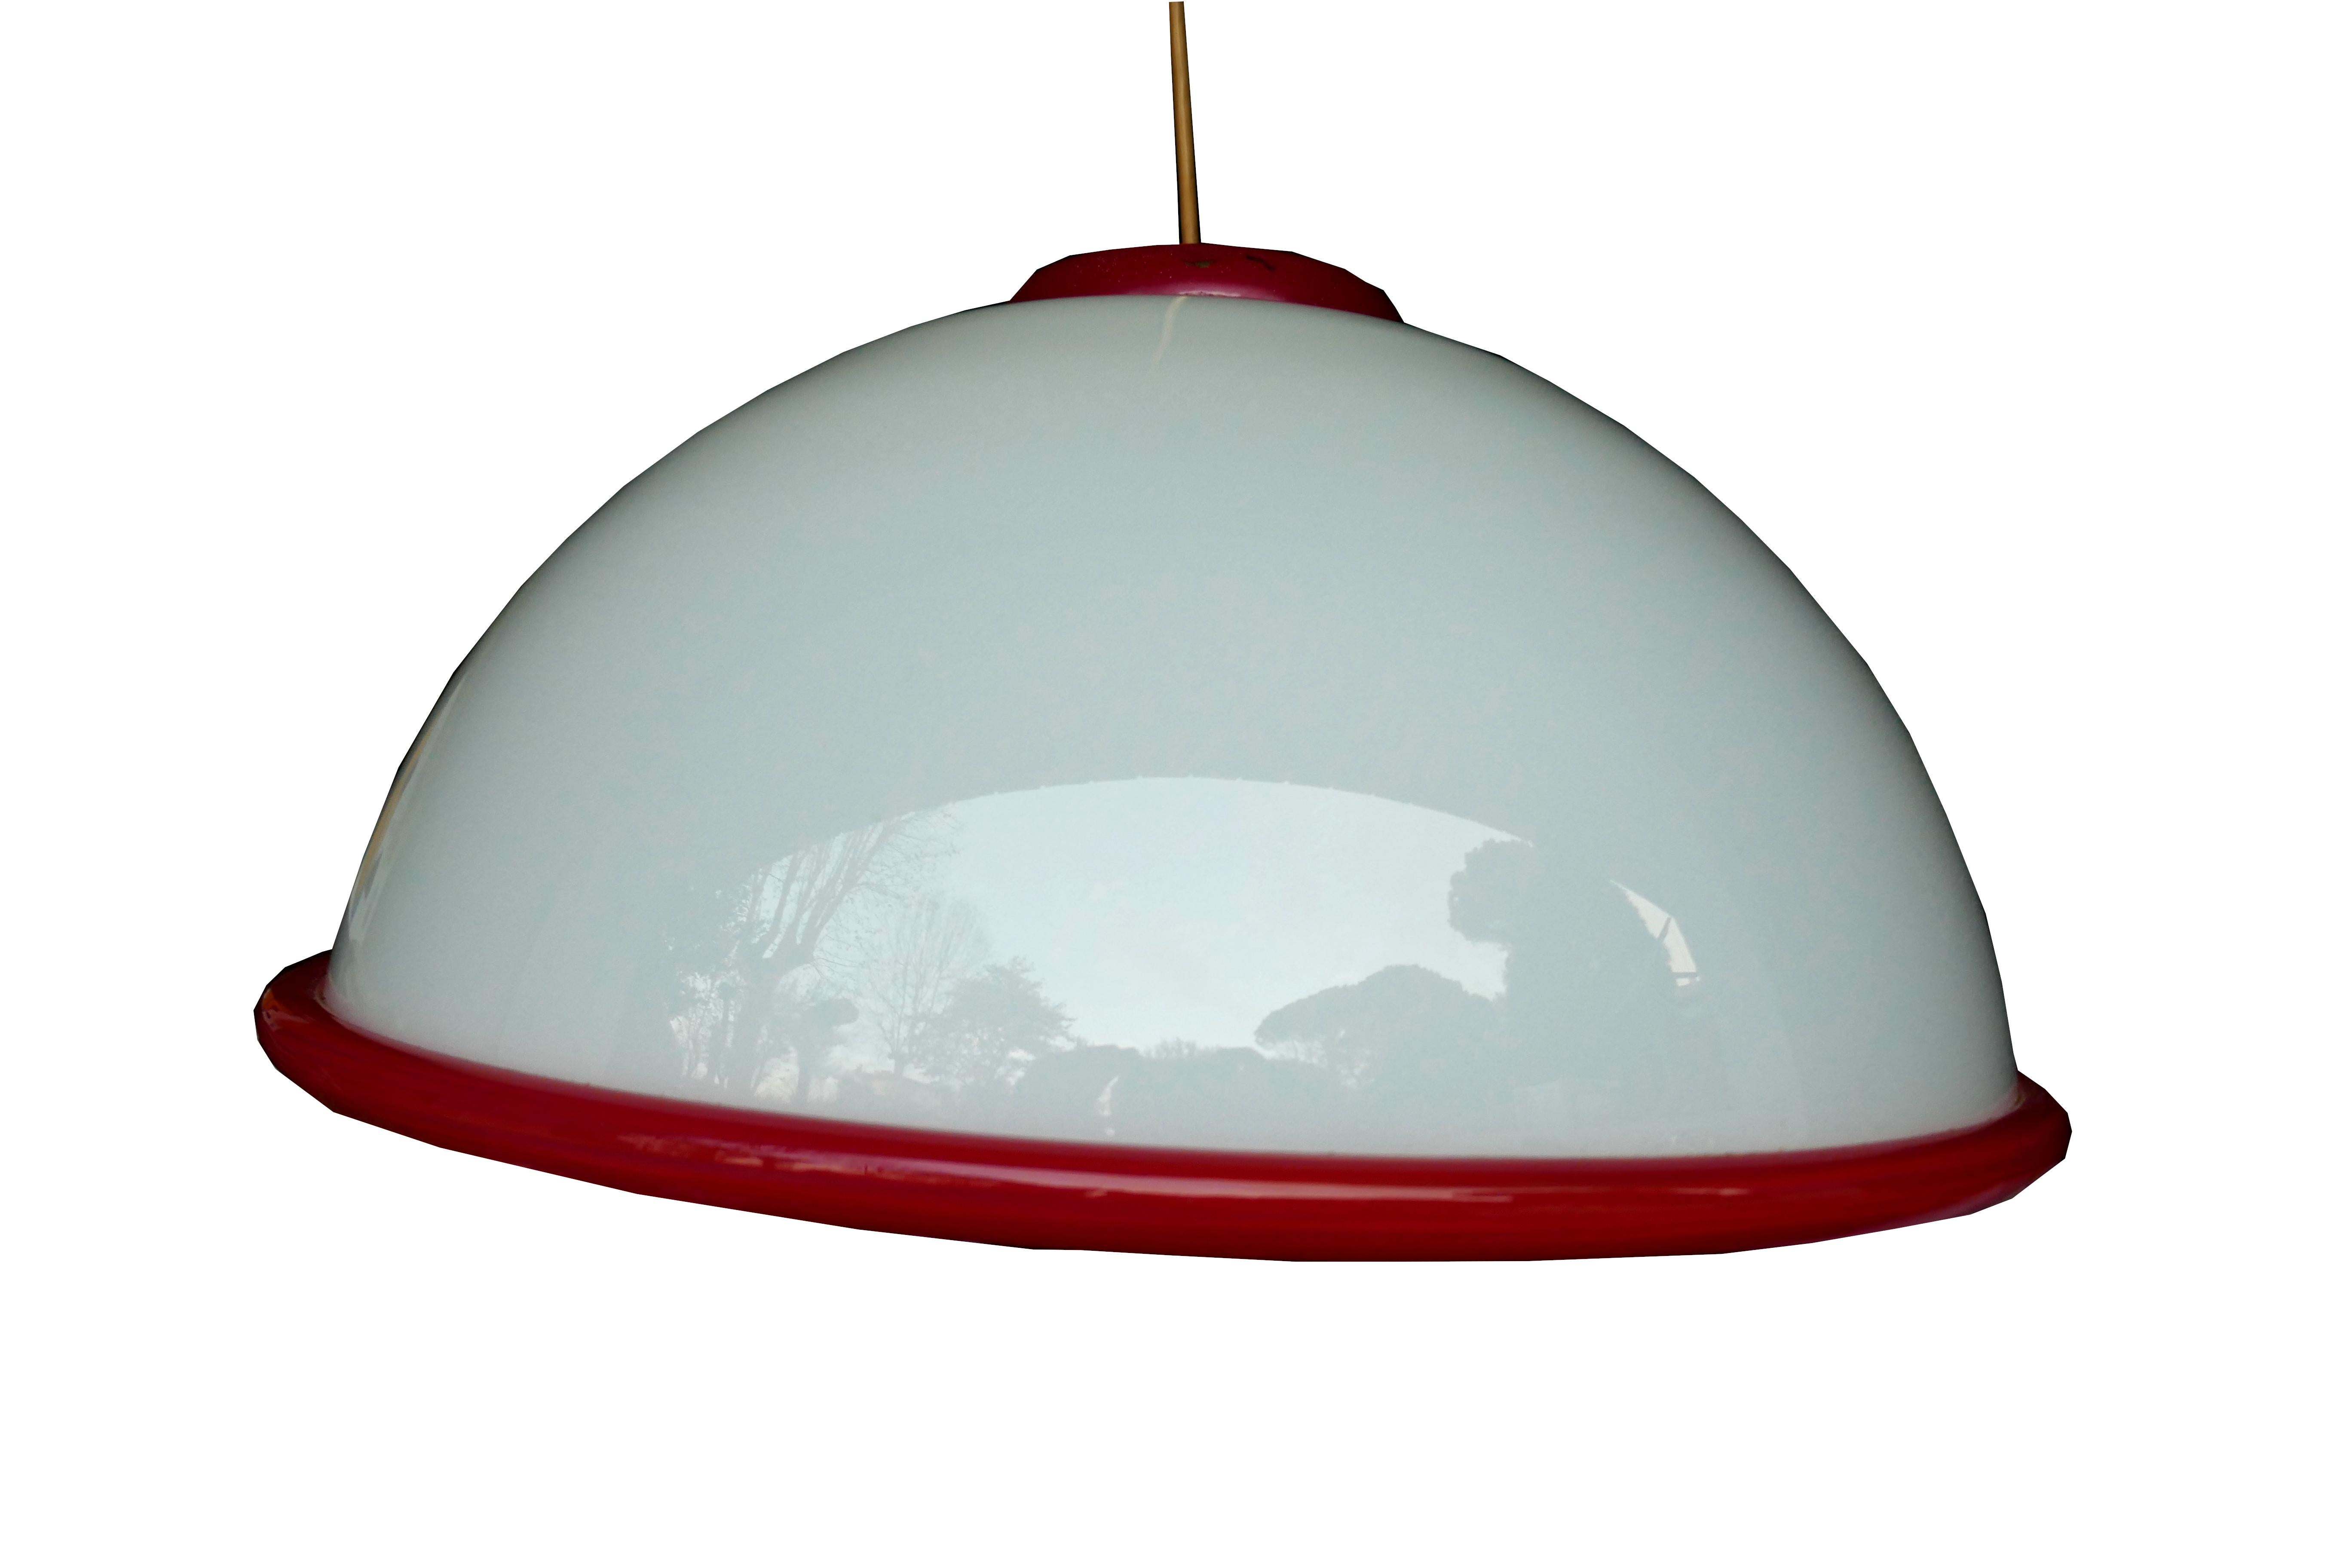 Pendant lamp 1970
In the style of E Sottsass for Vistosi
Internal defect as pictured
Thank you 